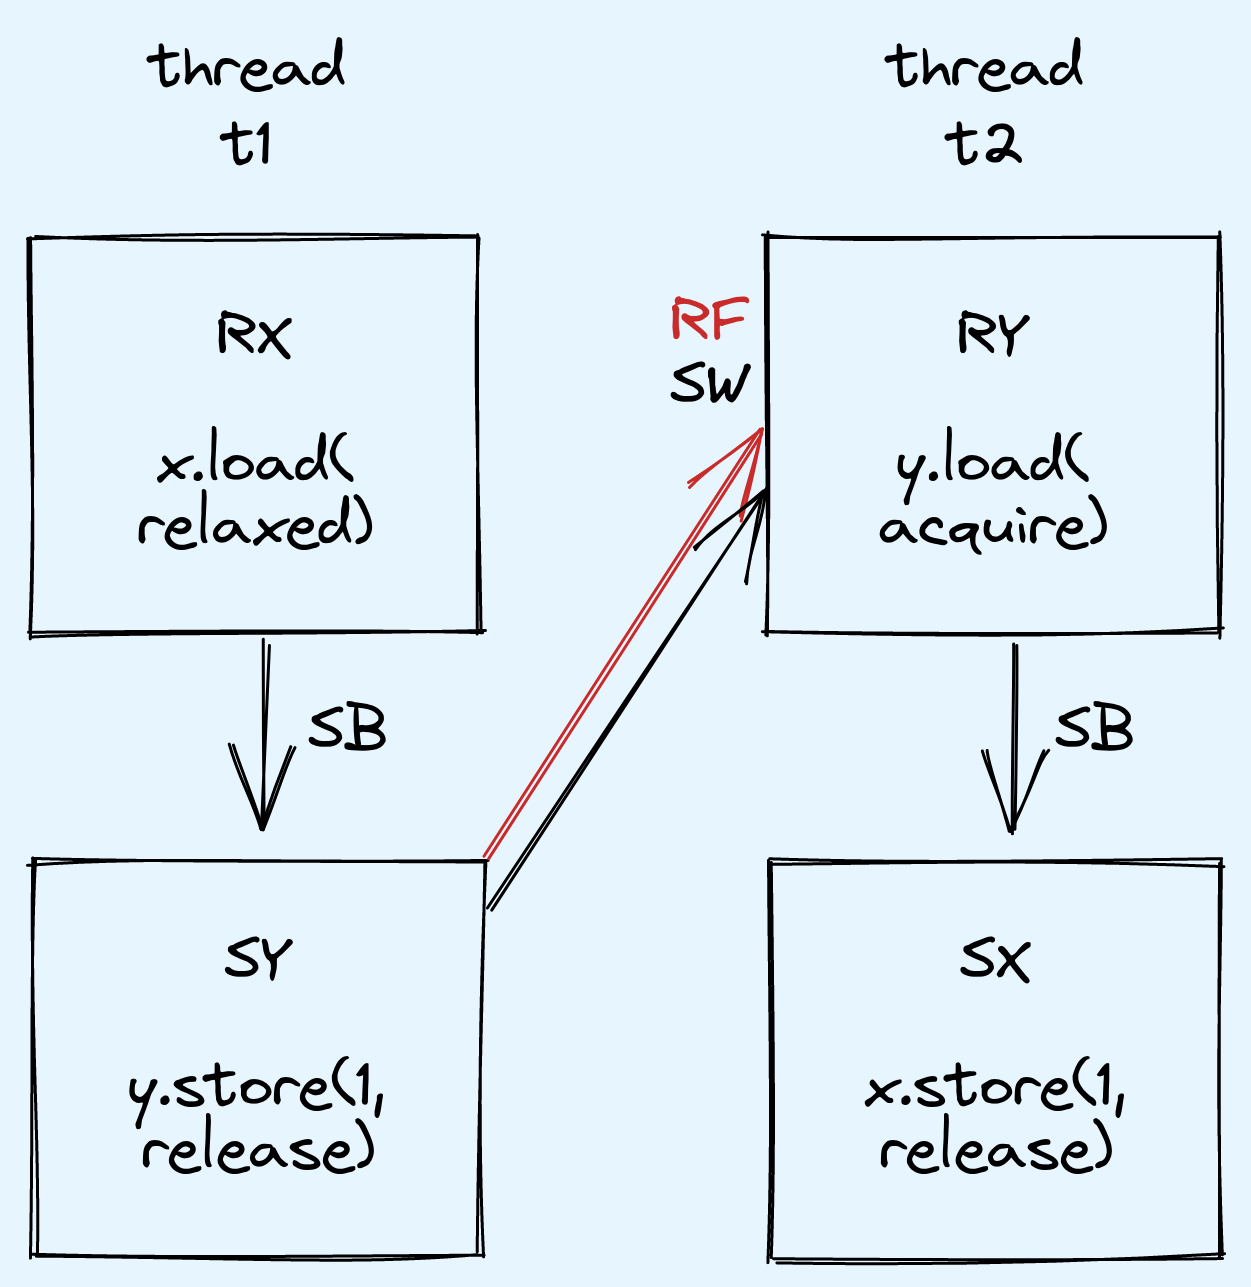 t1 synchronizes-with t2 due to the relation RY reads-from SY, and RY and SY are acquire and release operations respectively.